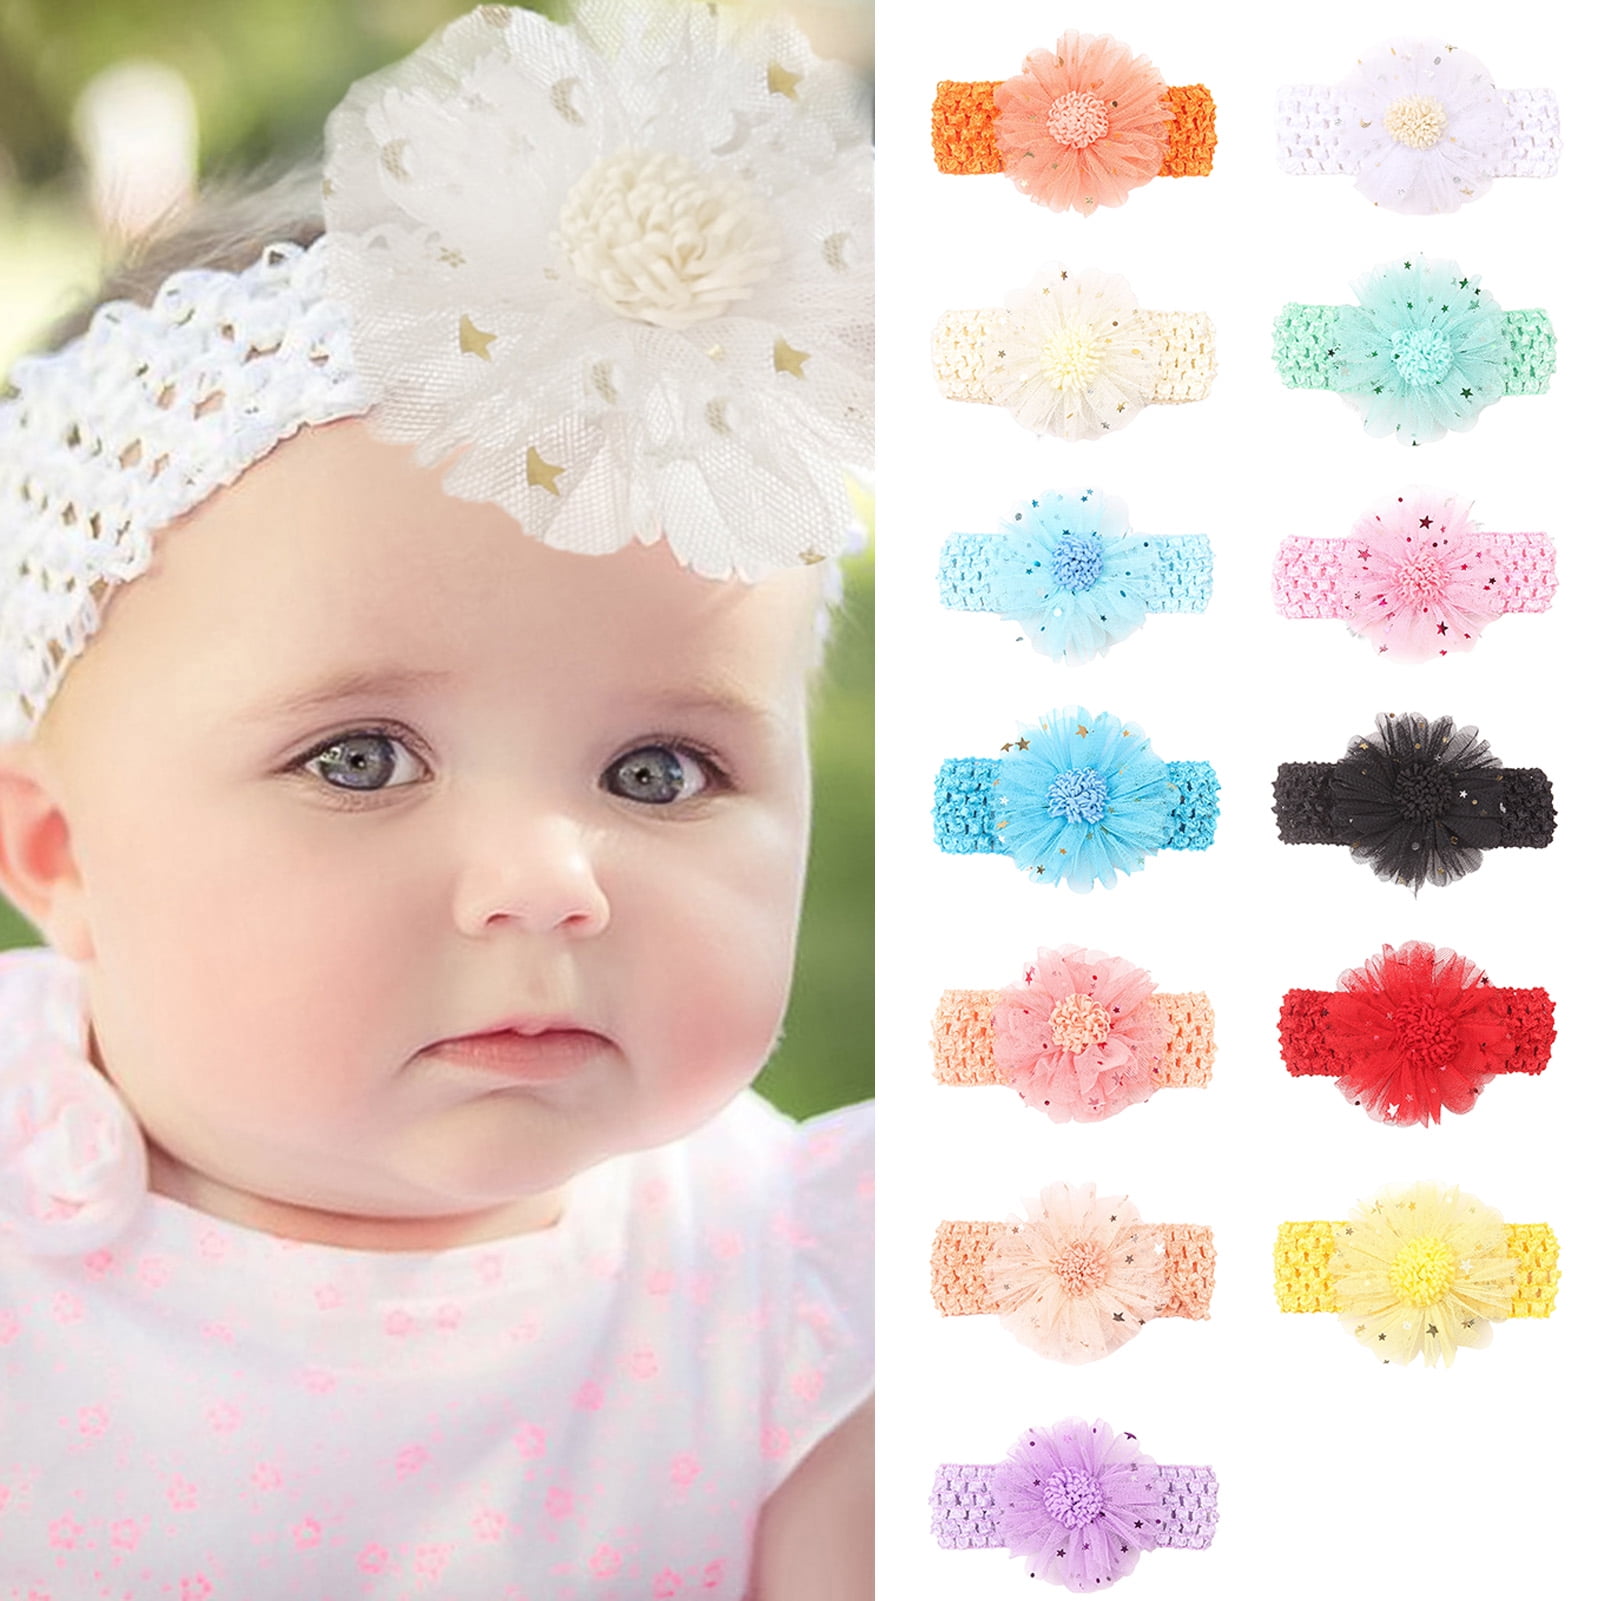 Yesbay 2 Pcs Baby Headband Sequins Design Lace Mesh Flower Shape Attractive  Adorable Decorative Soft Summer Princess-style Infant Girl Hair Band  Household Supplies 